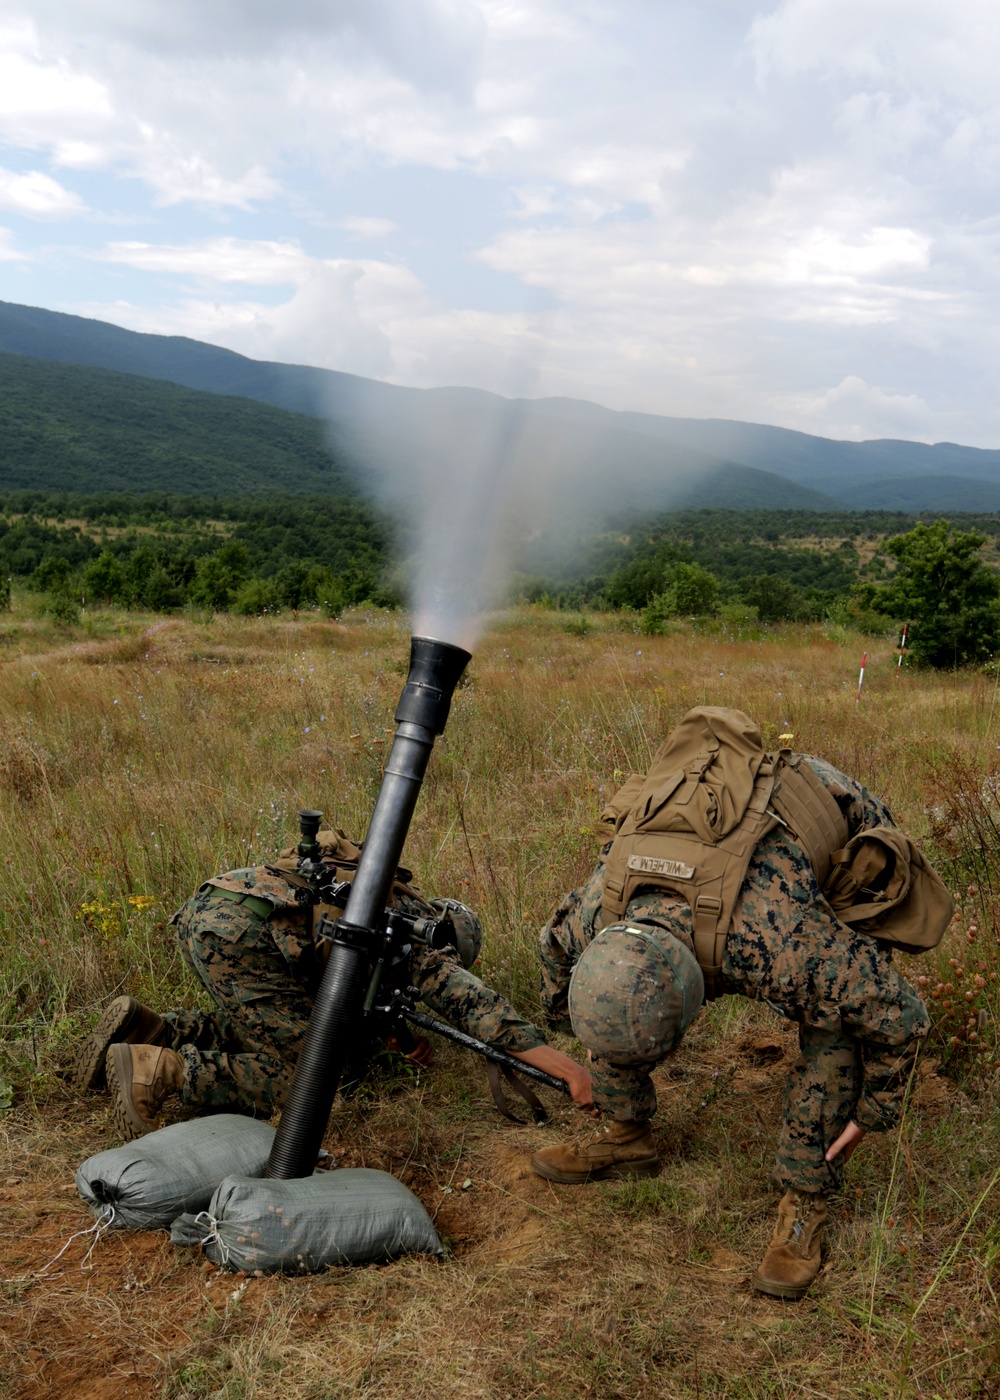 U.S. Marines and saliors of exercise Platinum Lion 14-1 conduct live-fire on July 20, 2014